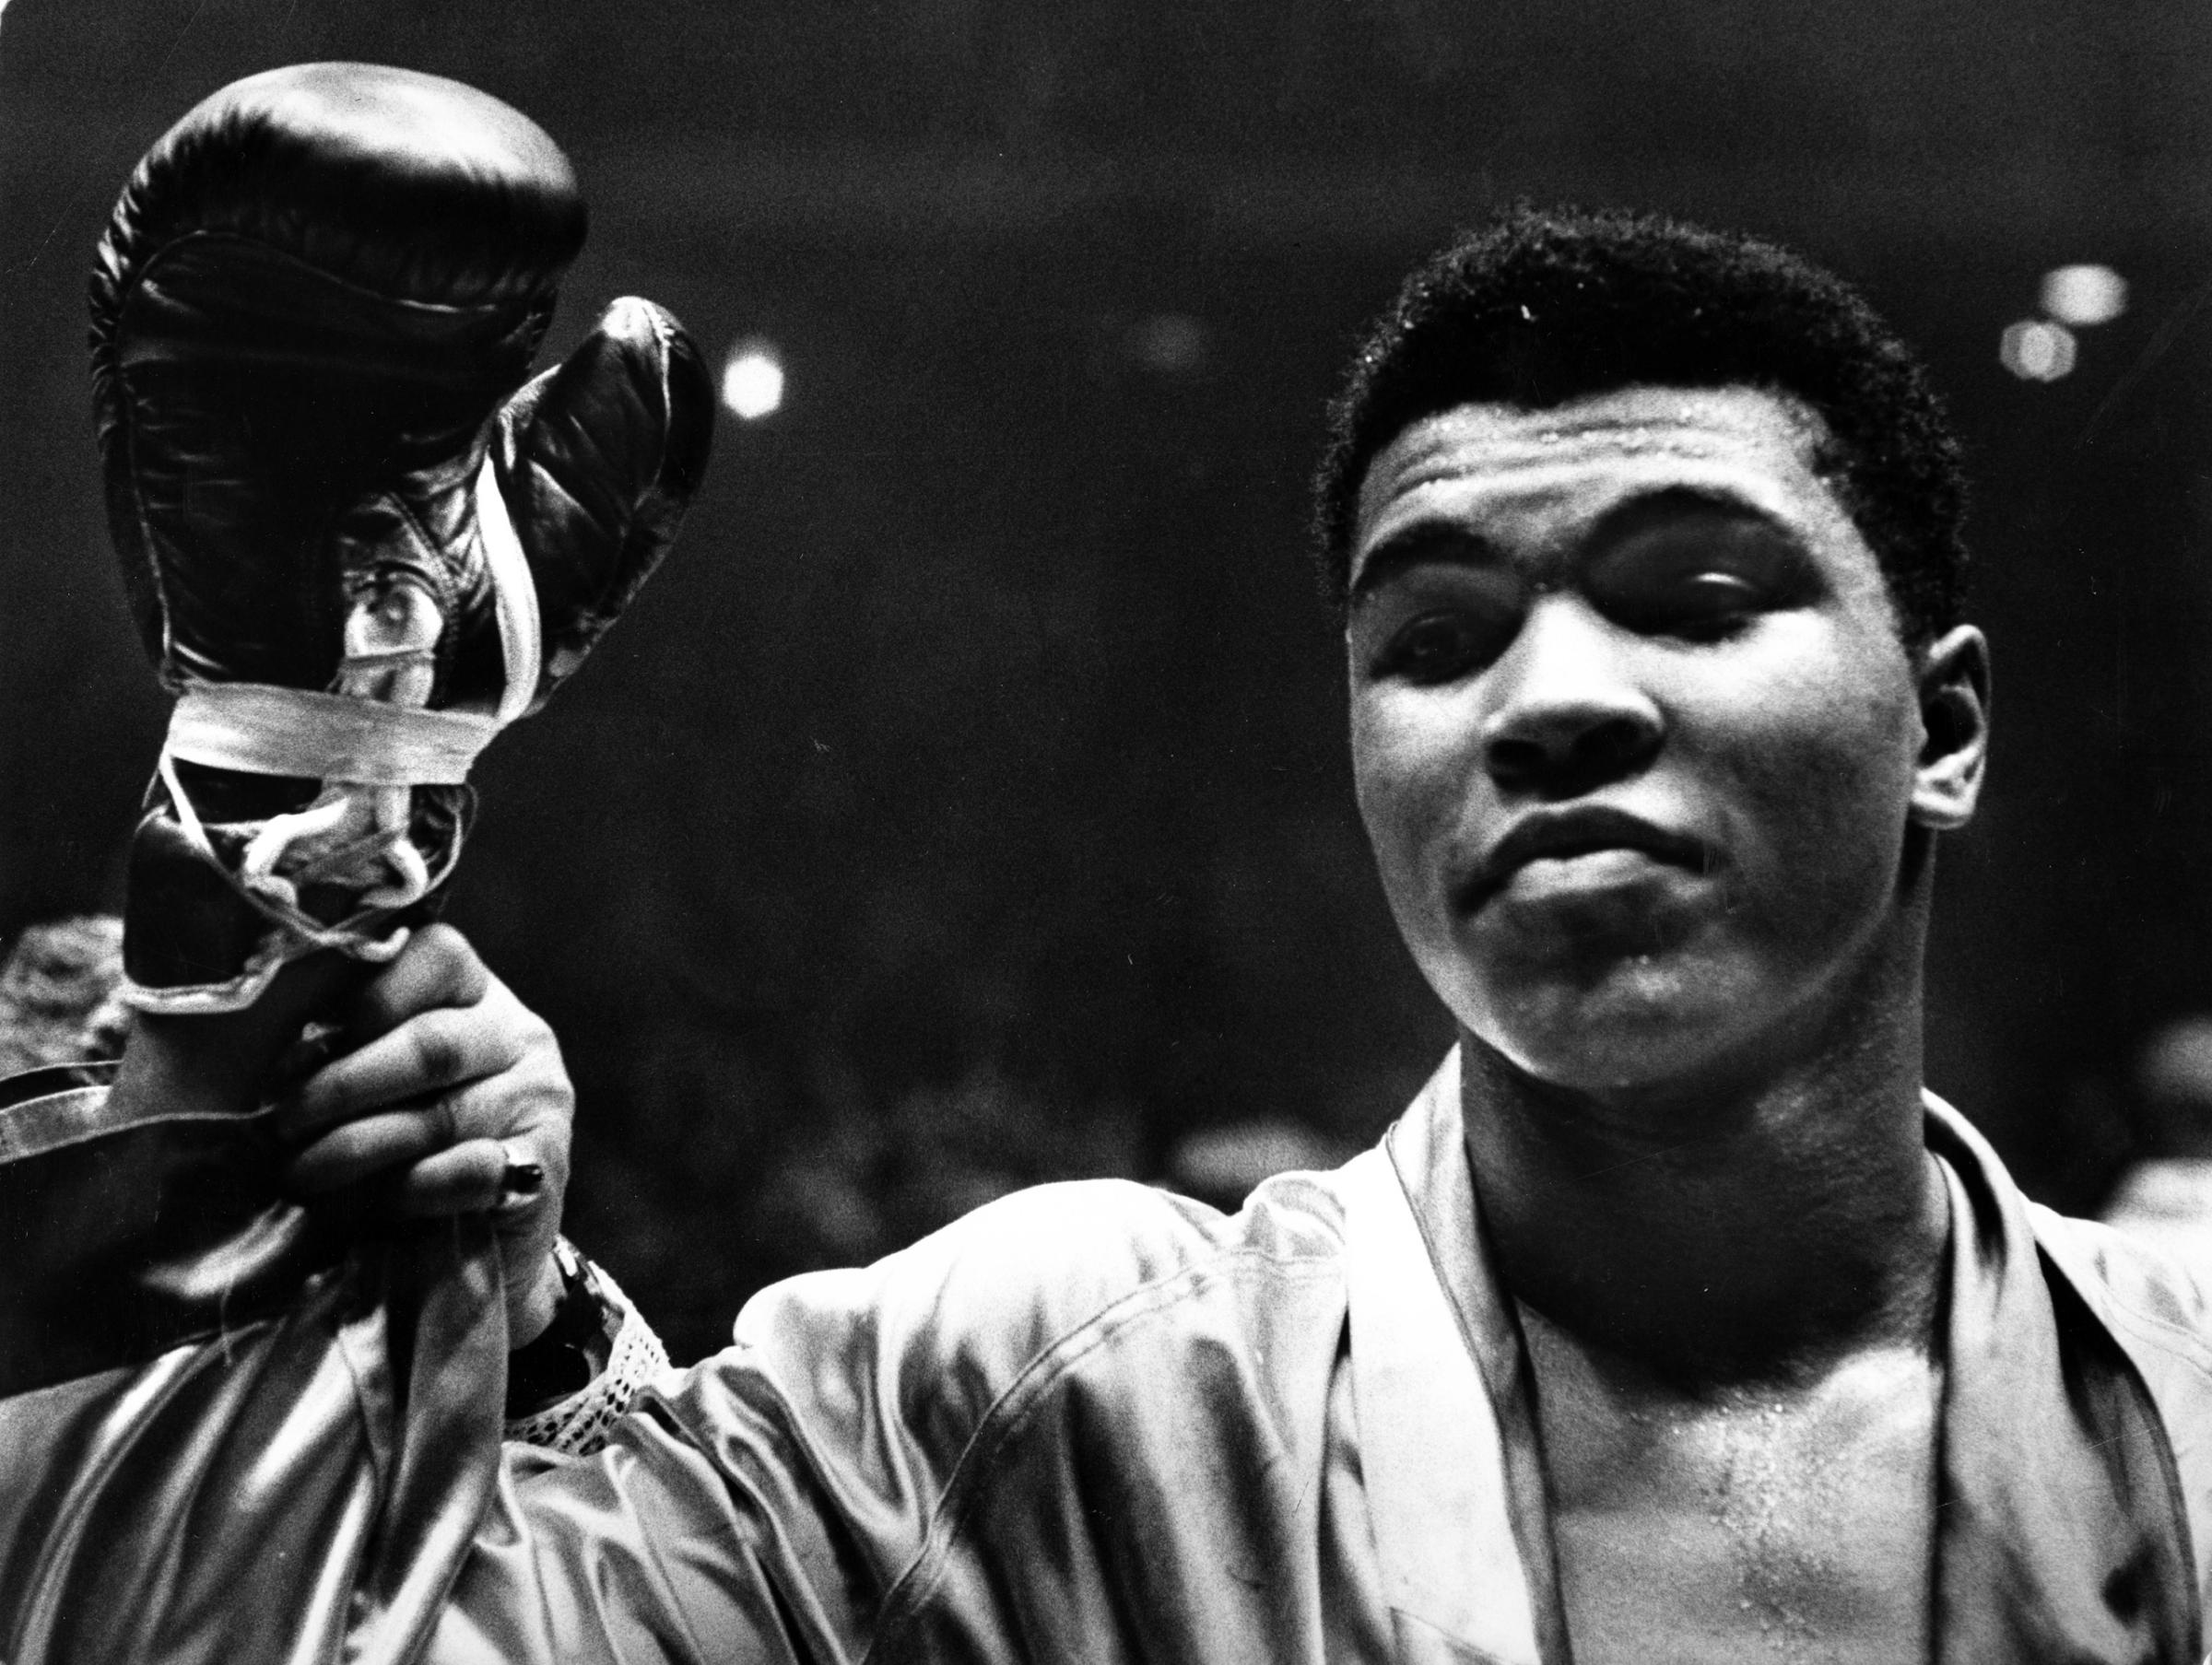 Cassius Clay (later Muhammad Ali) after defeating Doug Jones in close heavyweight bout, in Madison Square Garden, 1963.